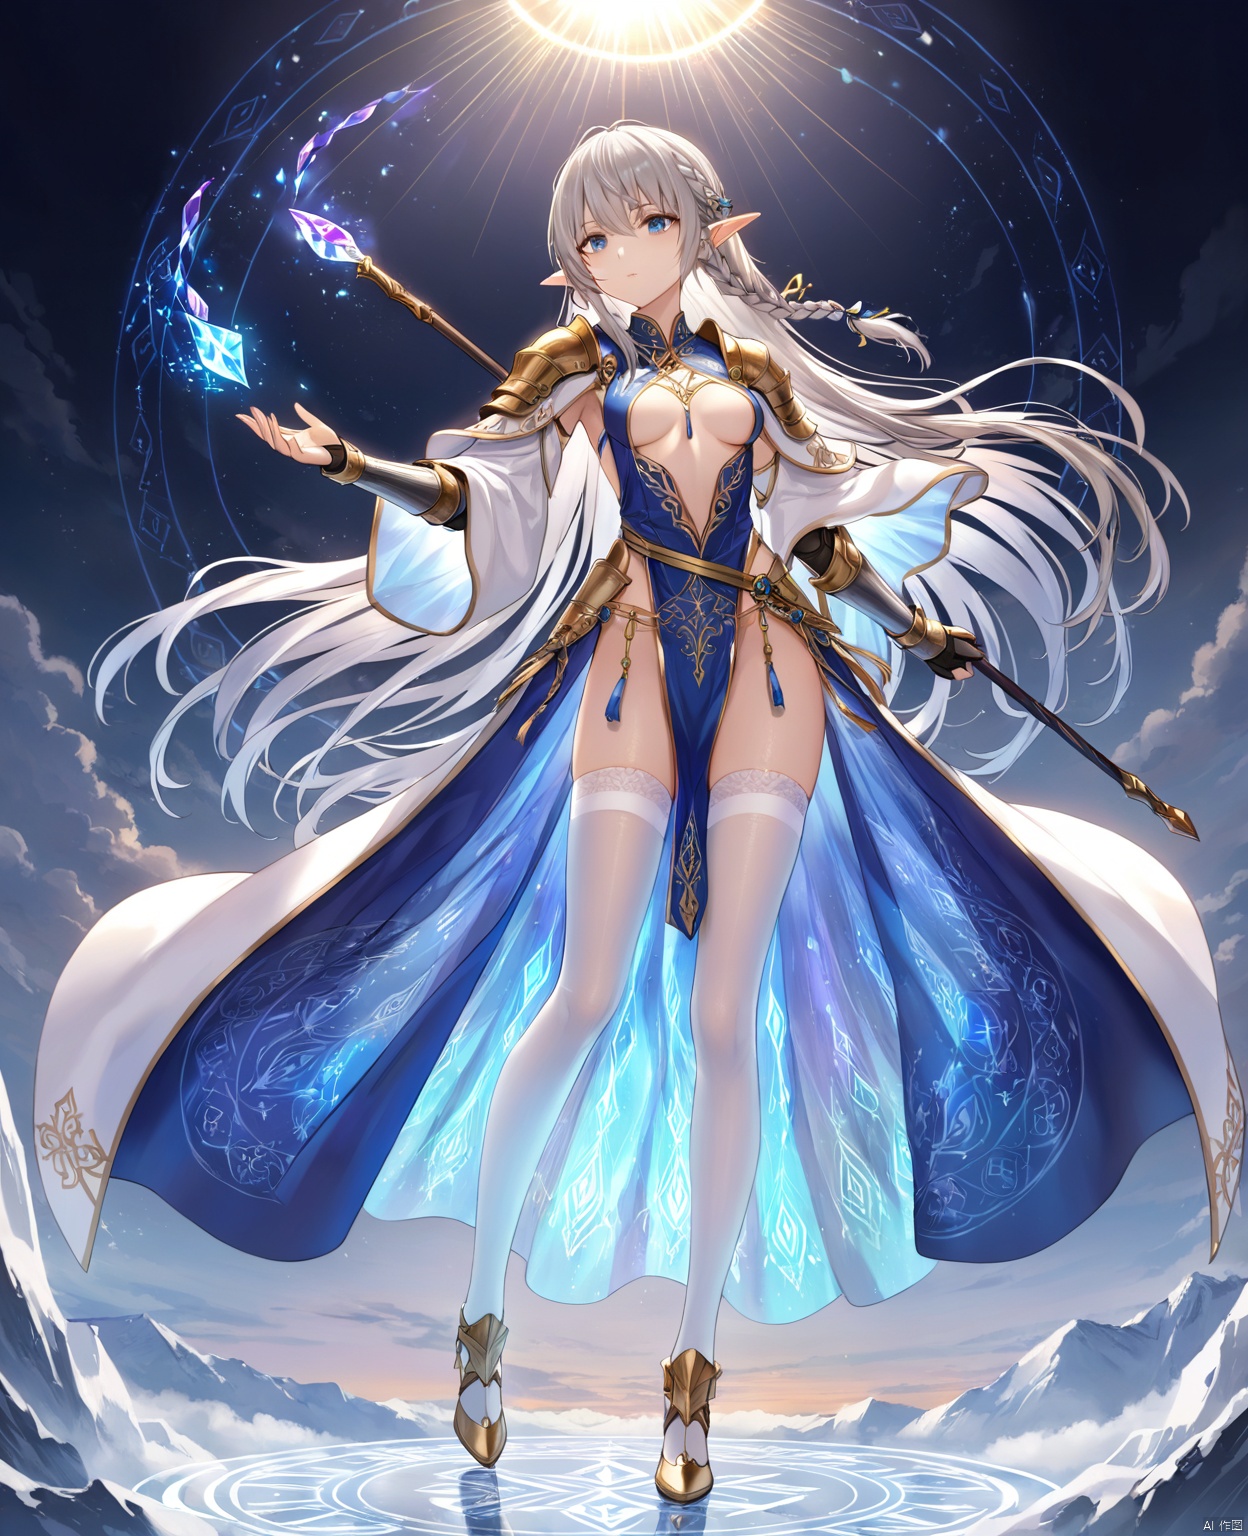  (Masterpiece), (Best Quality), Illustration, Super Detailed, hdr, Depth of Field, (Color), (White Stockings),1 character, fantasy heroine, final fantasy style, full body, intricate white mage robes with gold embroidery and flowing ribbons, ornate staff topped with a glowing crystal, pointed elven ears, voluminous silver hair styled in elegant braids cascading down her back, sky blue eyes with a hint of mystical light, delicate yet detailed gauntlets reaching to the elbows, armored pauldrons protecting her shoulders, sheer inner garment revealing subtle hints of an azure undergarment, serene expression, standing on a magical circle inscribed with ancient runes, casting a healing spell, surrounded by soft ethereal glow and floral motes."